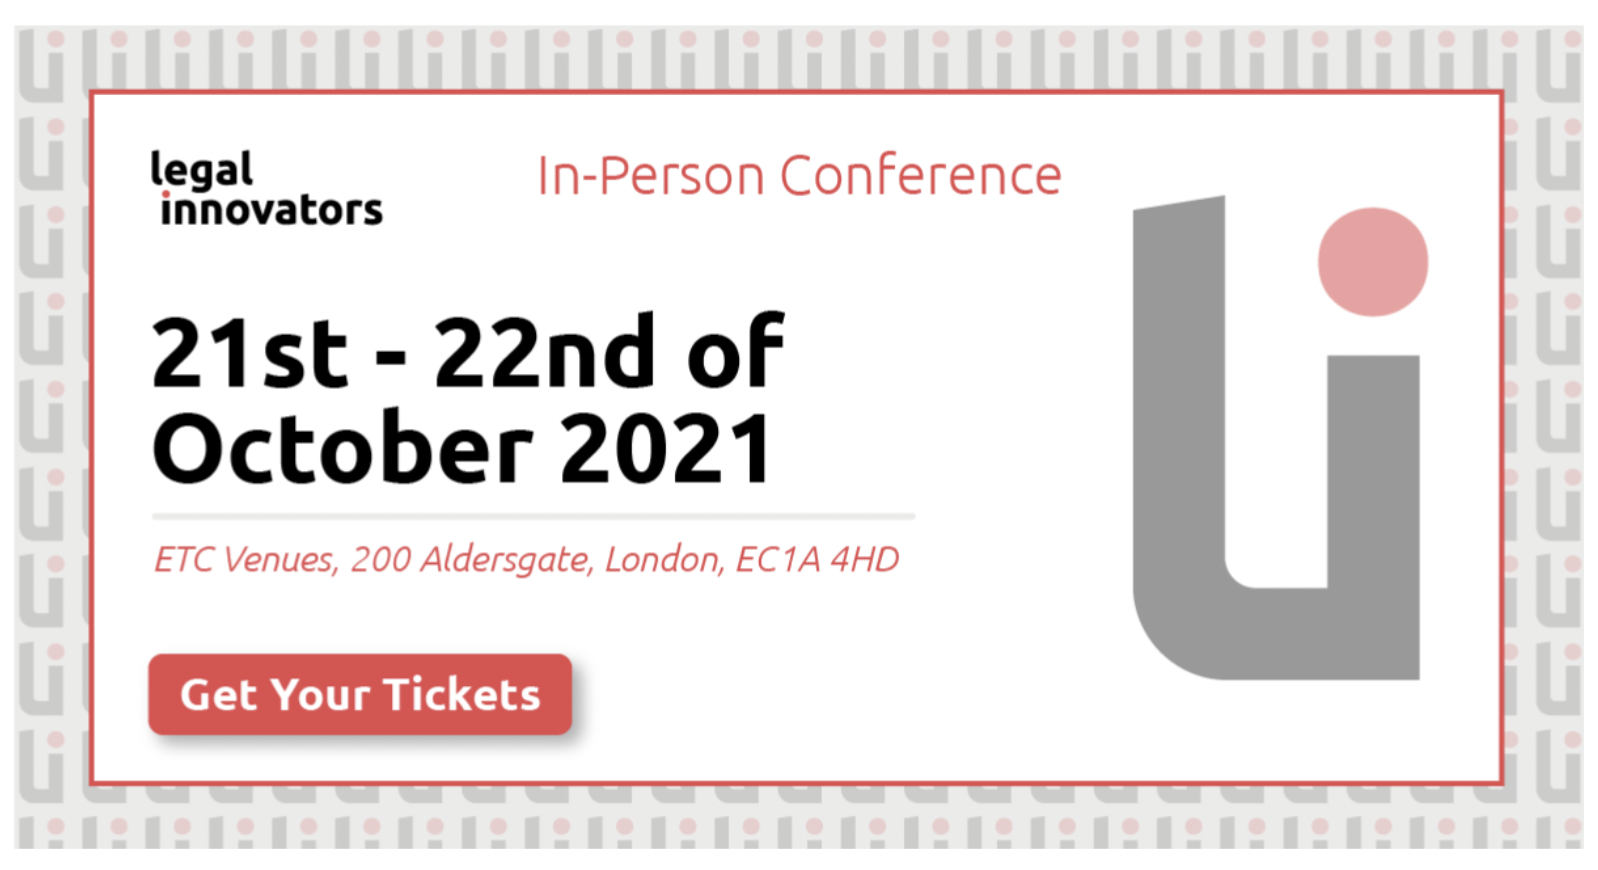 Legal Innovators Conference: New Speakers Announced!